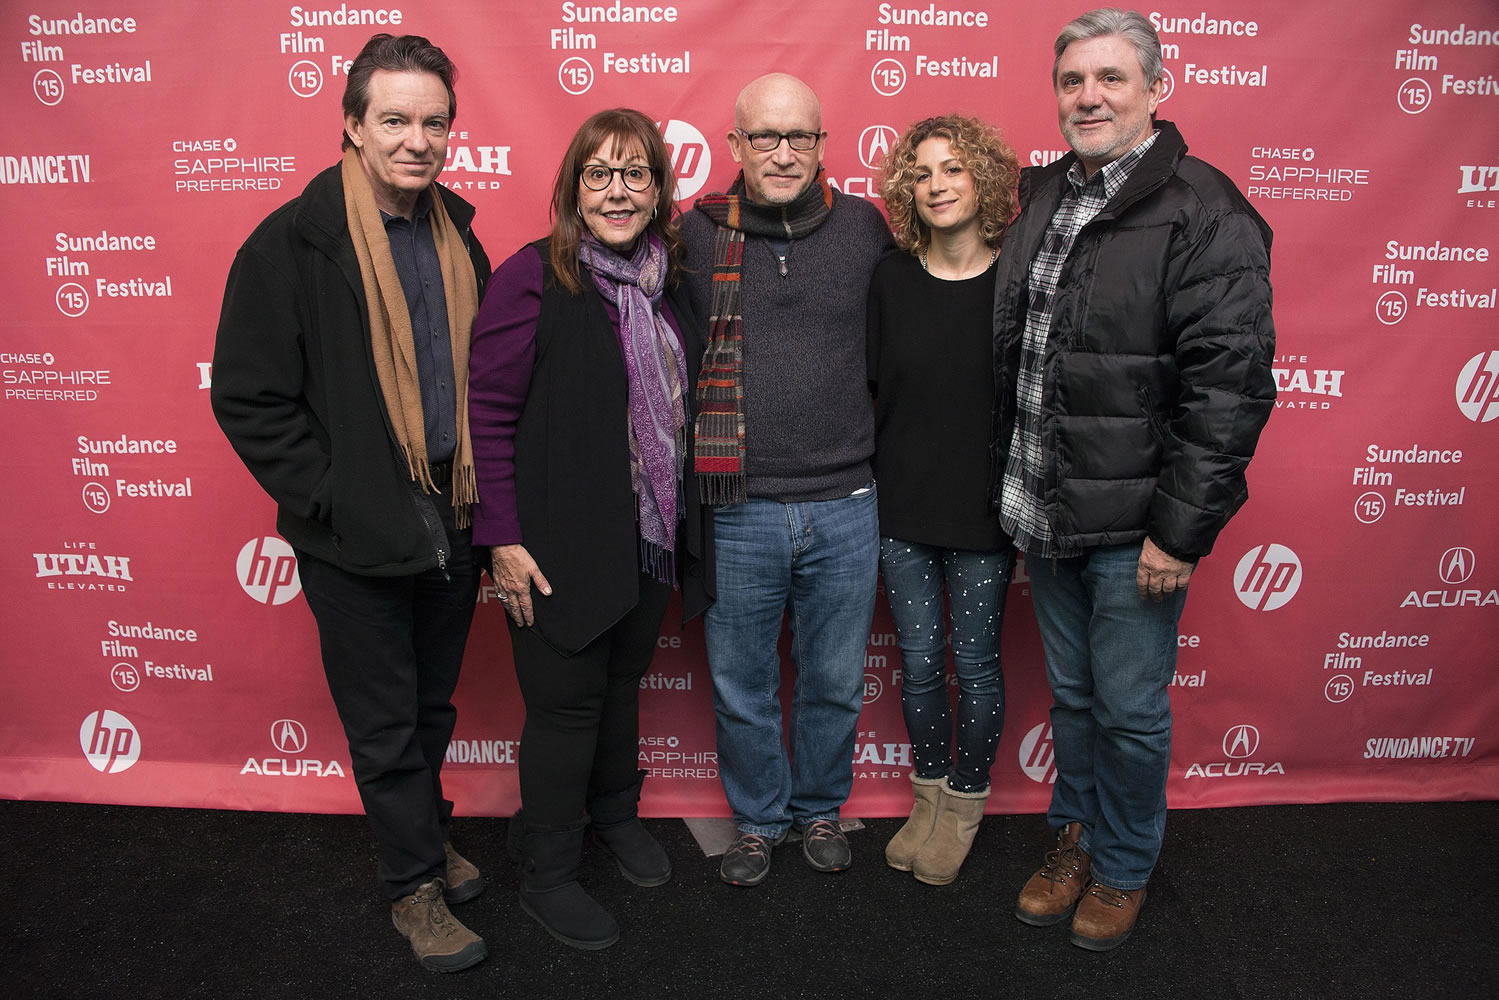 Author-producer Lawrence Wright, from left, former Scientology church member Spanky Taylor; director Alex Gibney; Senior VP of Programming for HBO Documentaries Sara Bernstein and former Scientology church member Mike Rinder attend the premiere of &quot;Going Clear: Scientology and the Prison of Belief&quot; at the 2015 Sundance Film Festival in Park City, Utah.